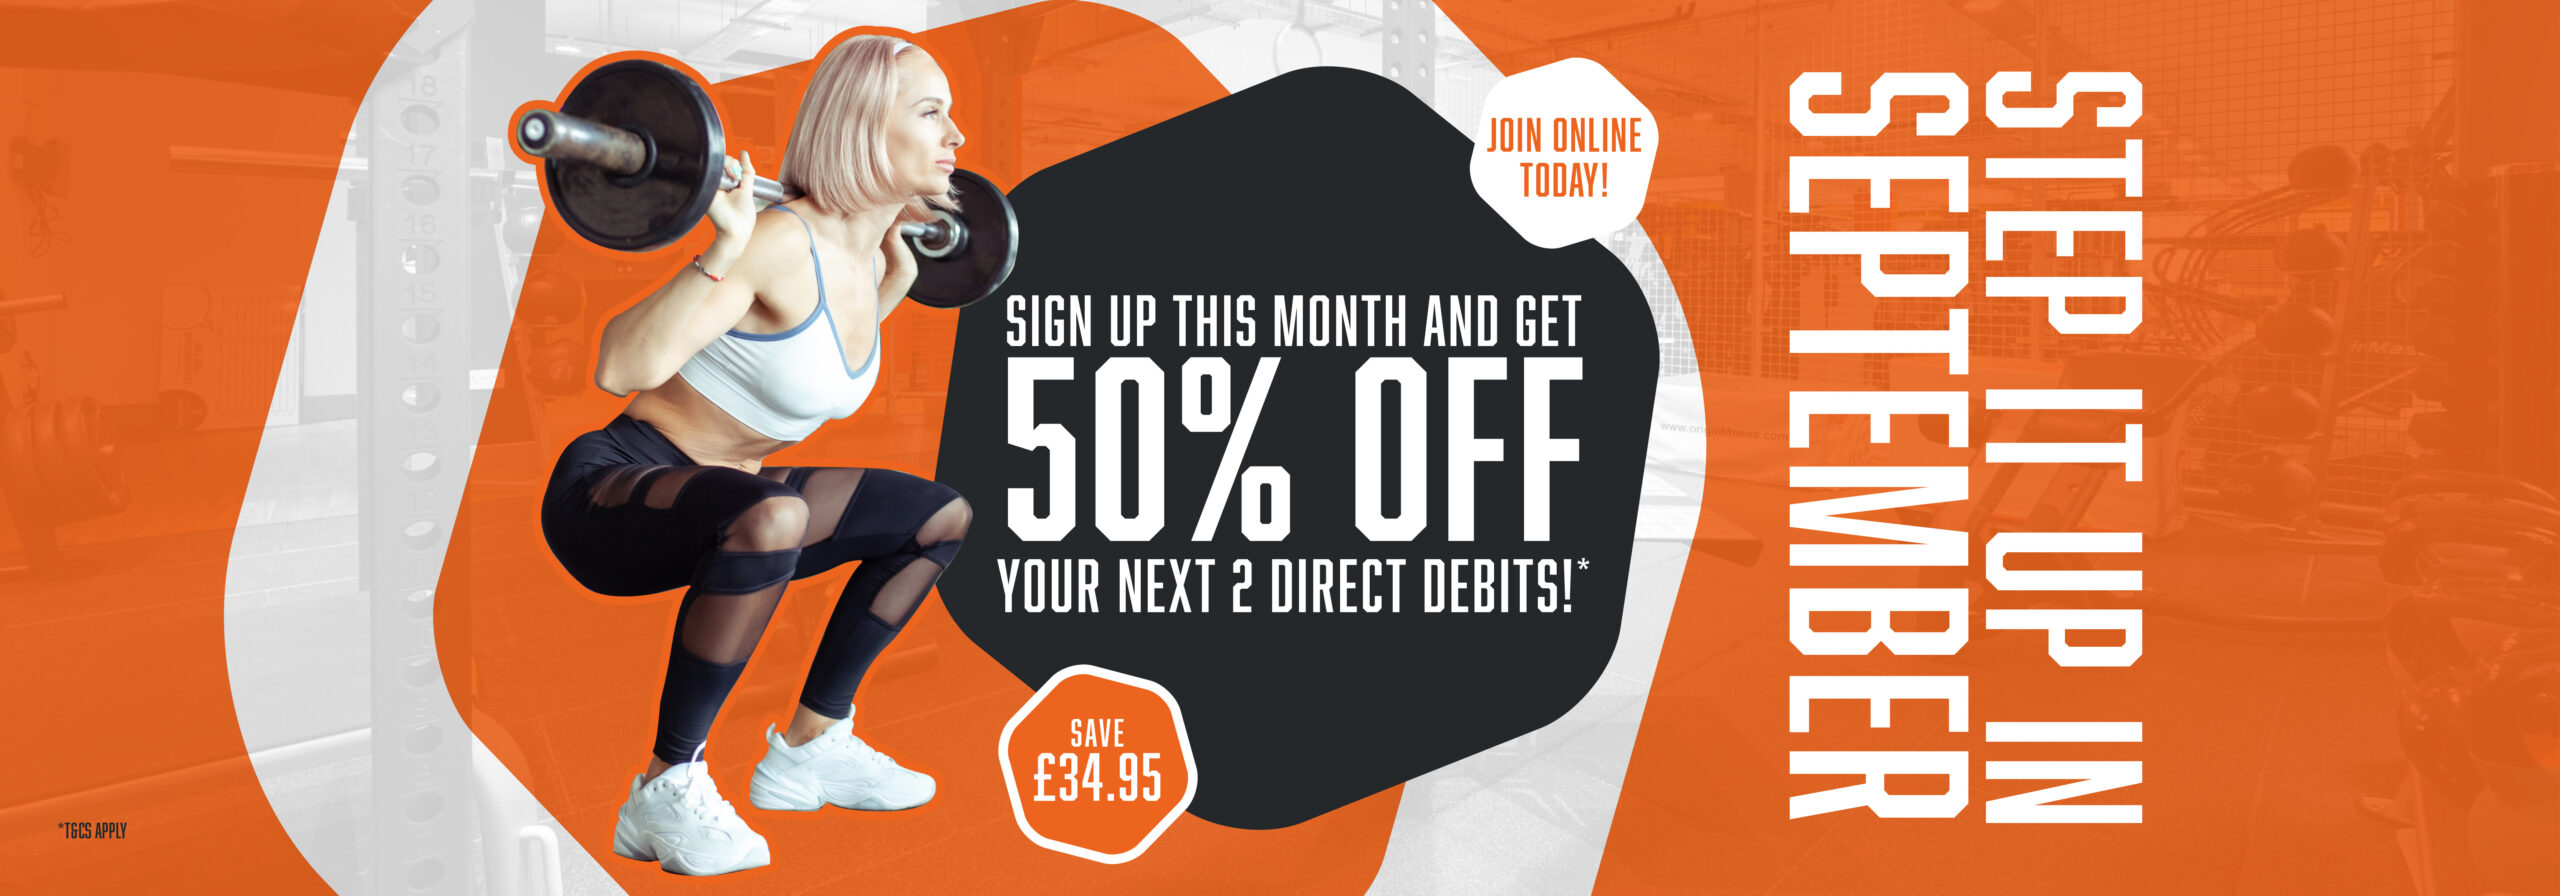 Get 50% off your next two direct debits!